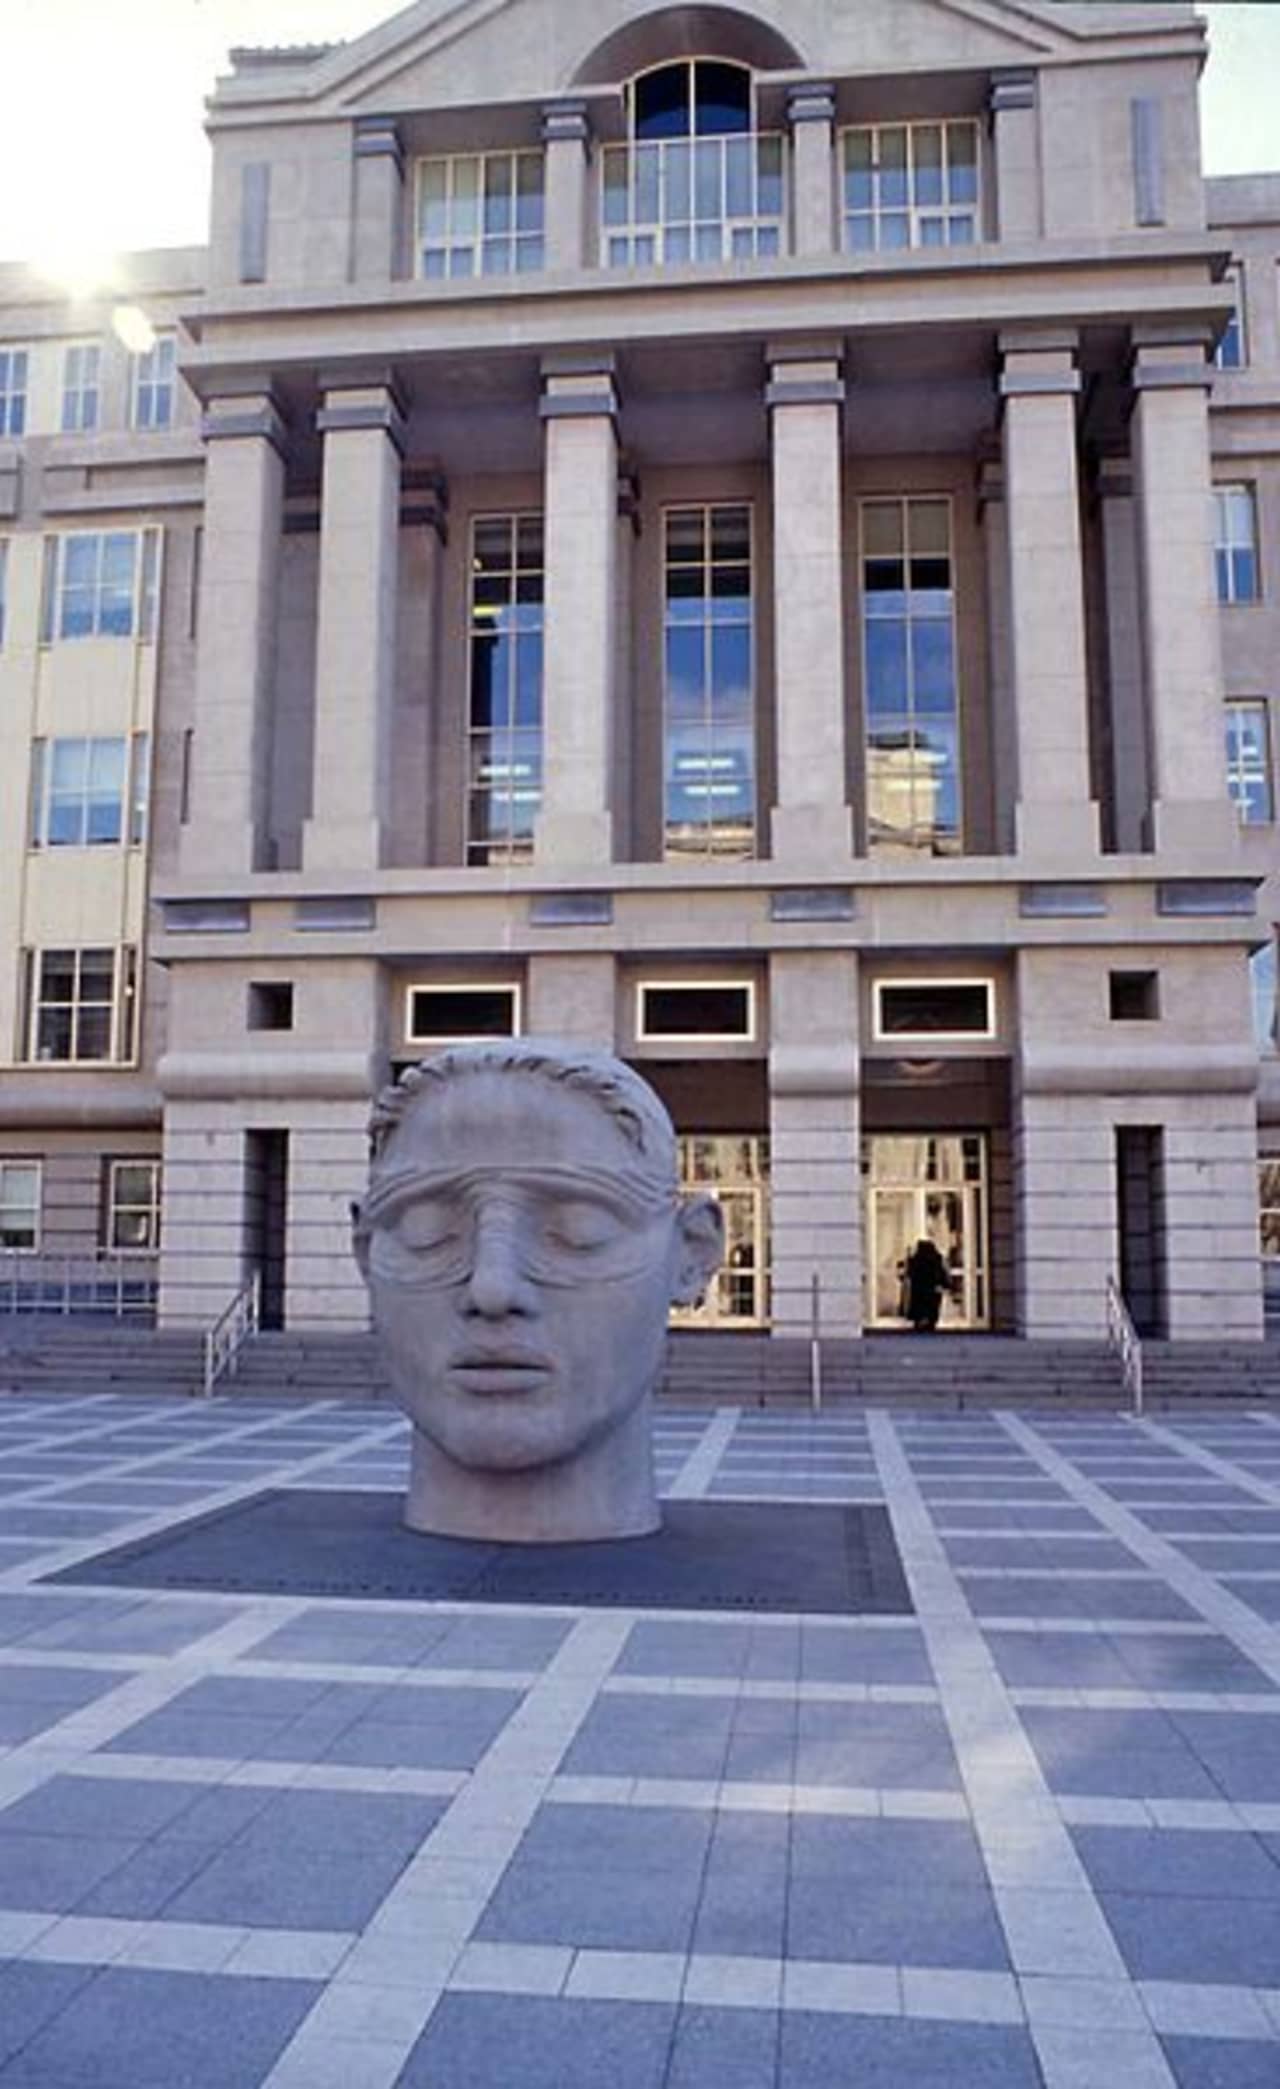 Martin Luther King Jr. federal courthouse in Newark